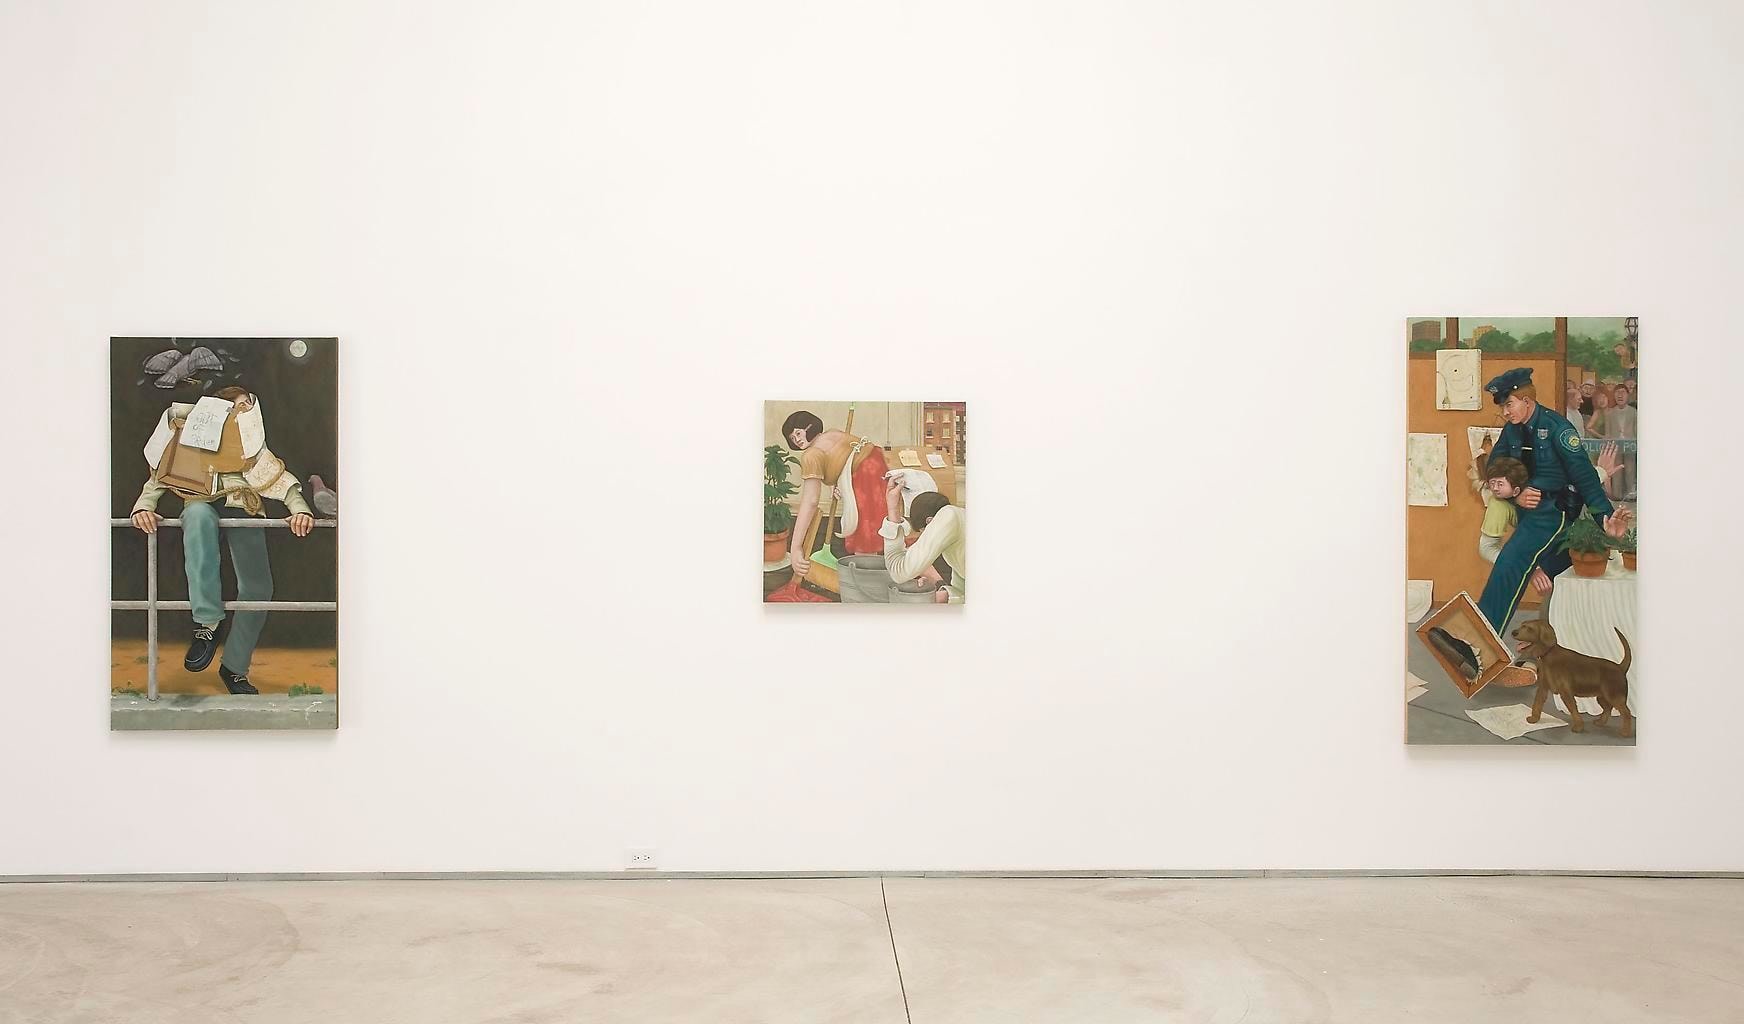  Installation view, Michael Cline, Fifth Column, Marc Jancou, New York, September 10 - October 30, 2009